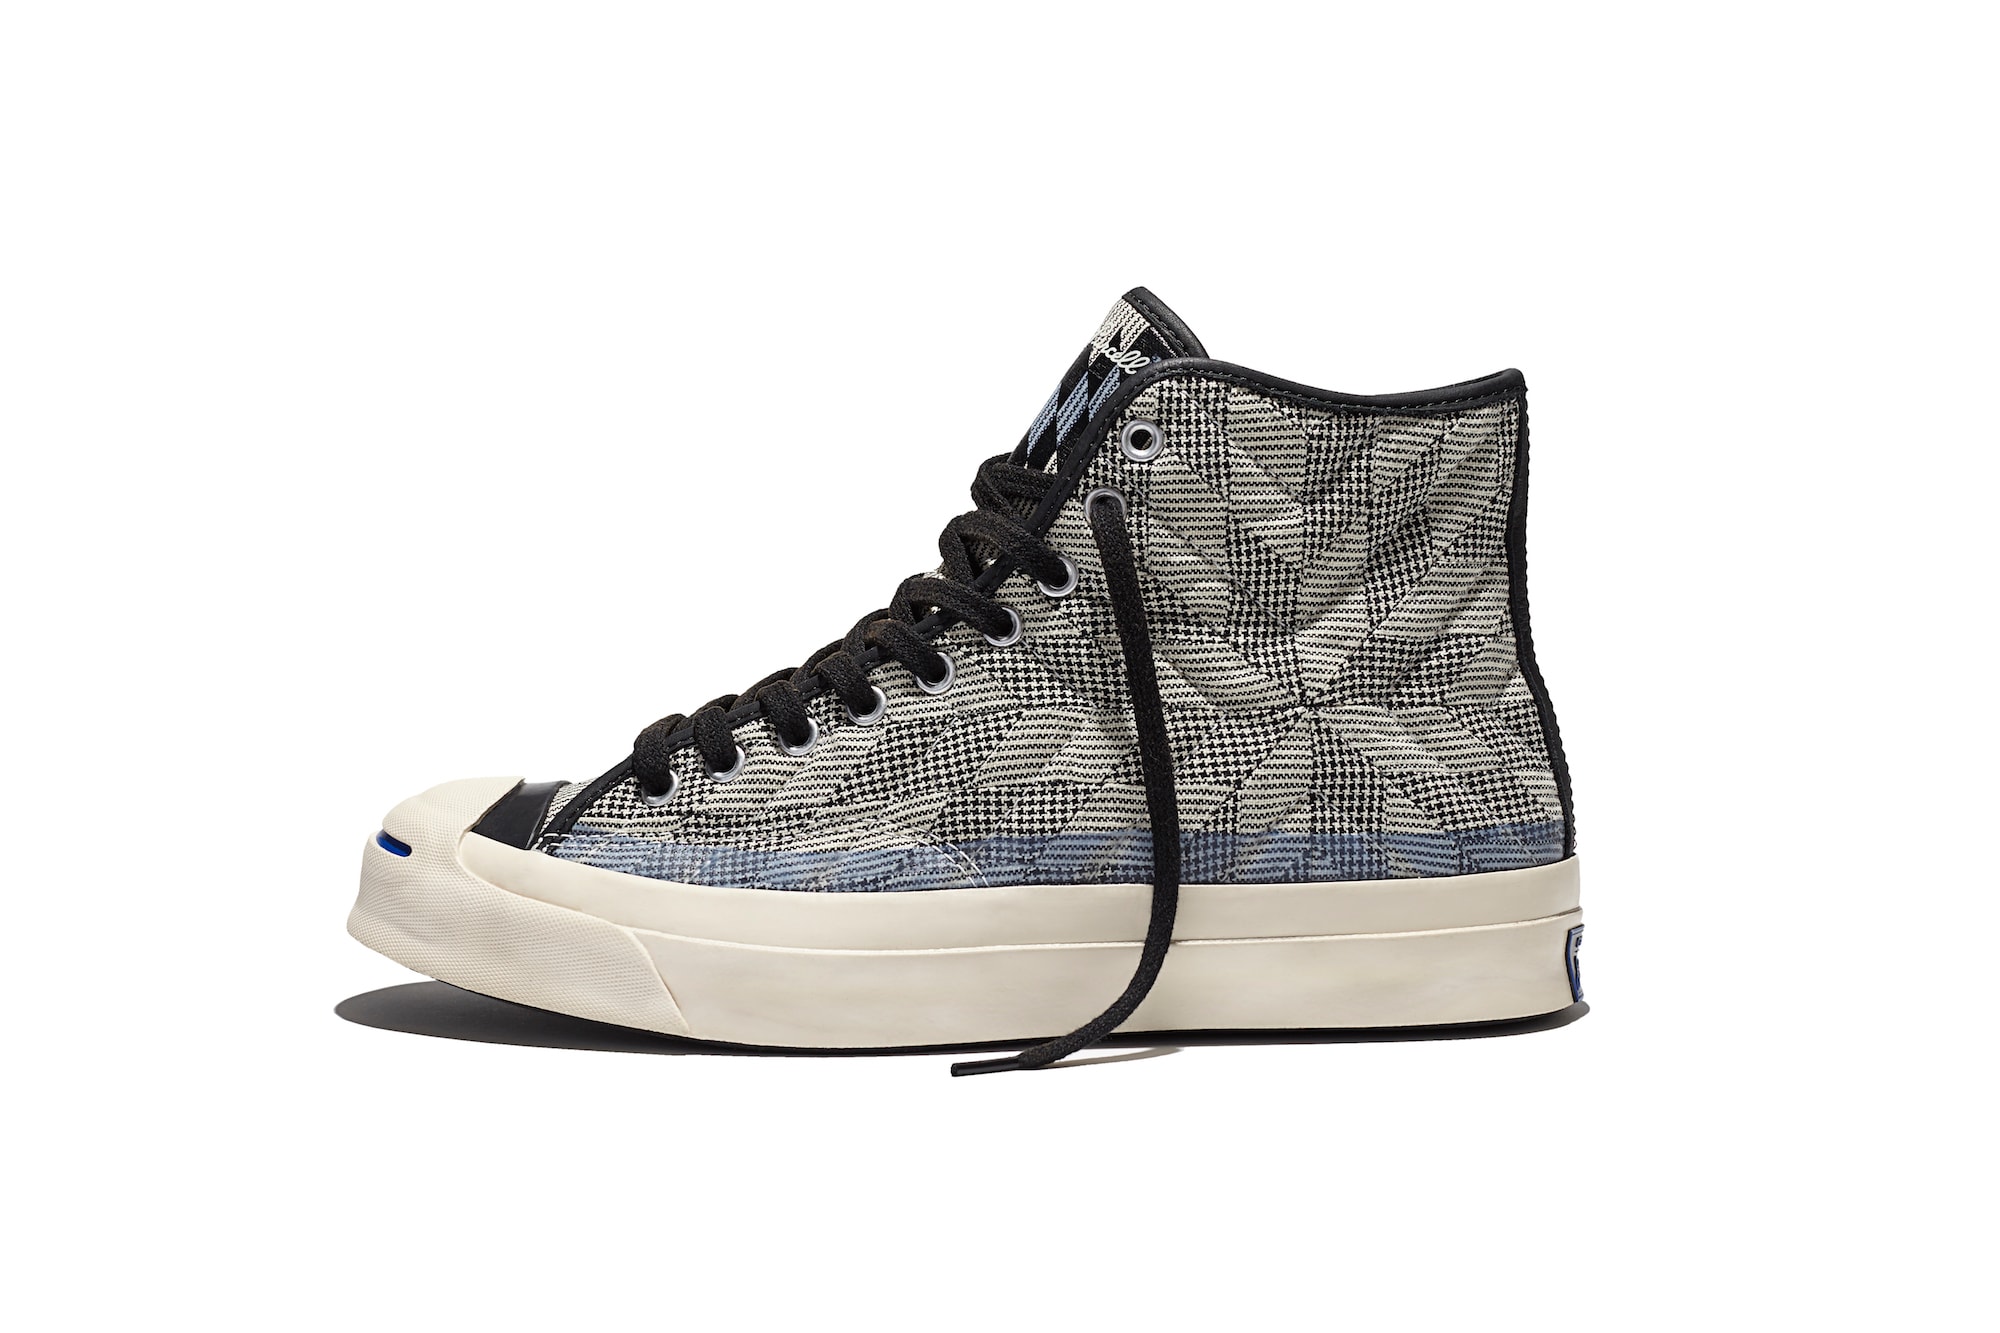 Converse Jack Purcell Signature Mid "Quilt"